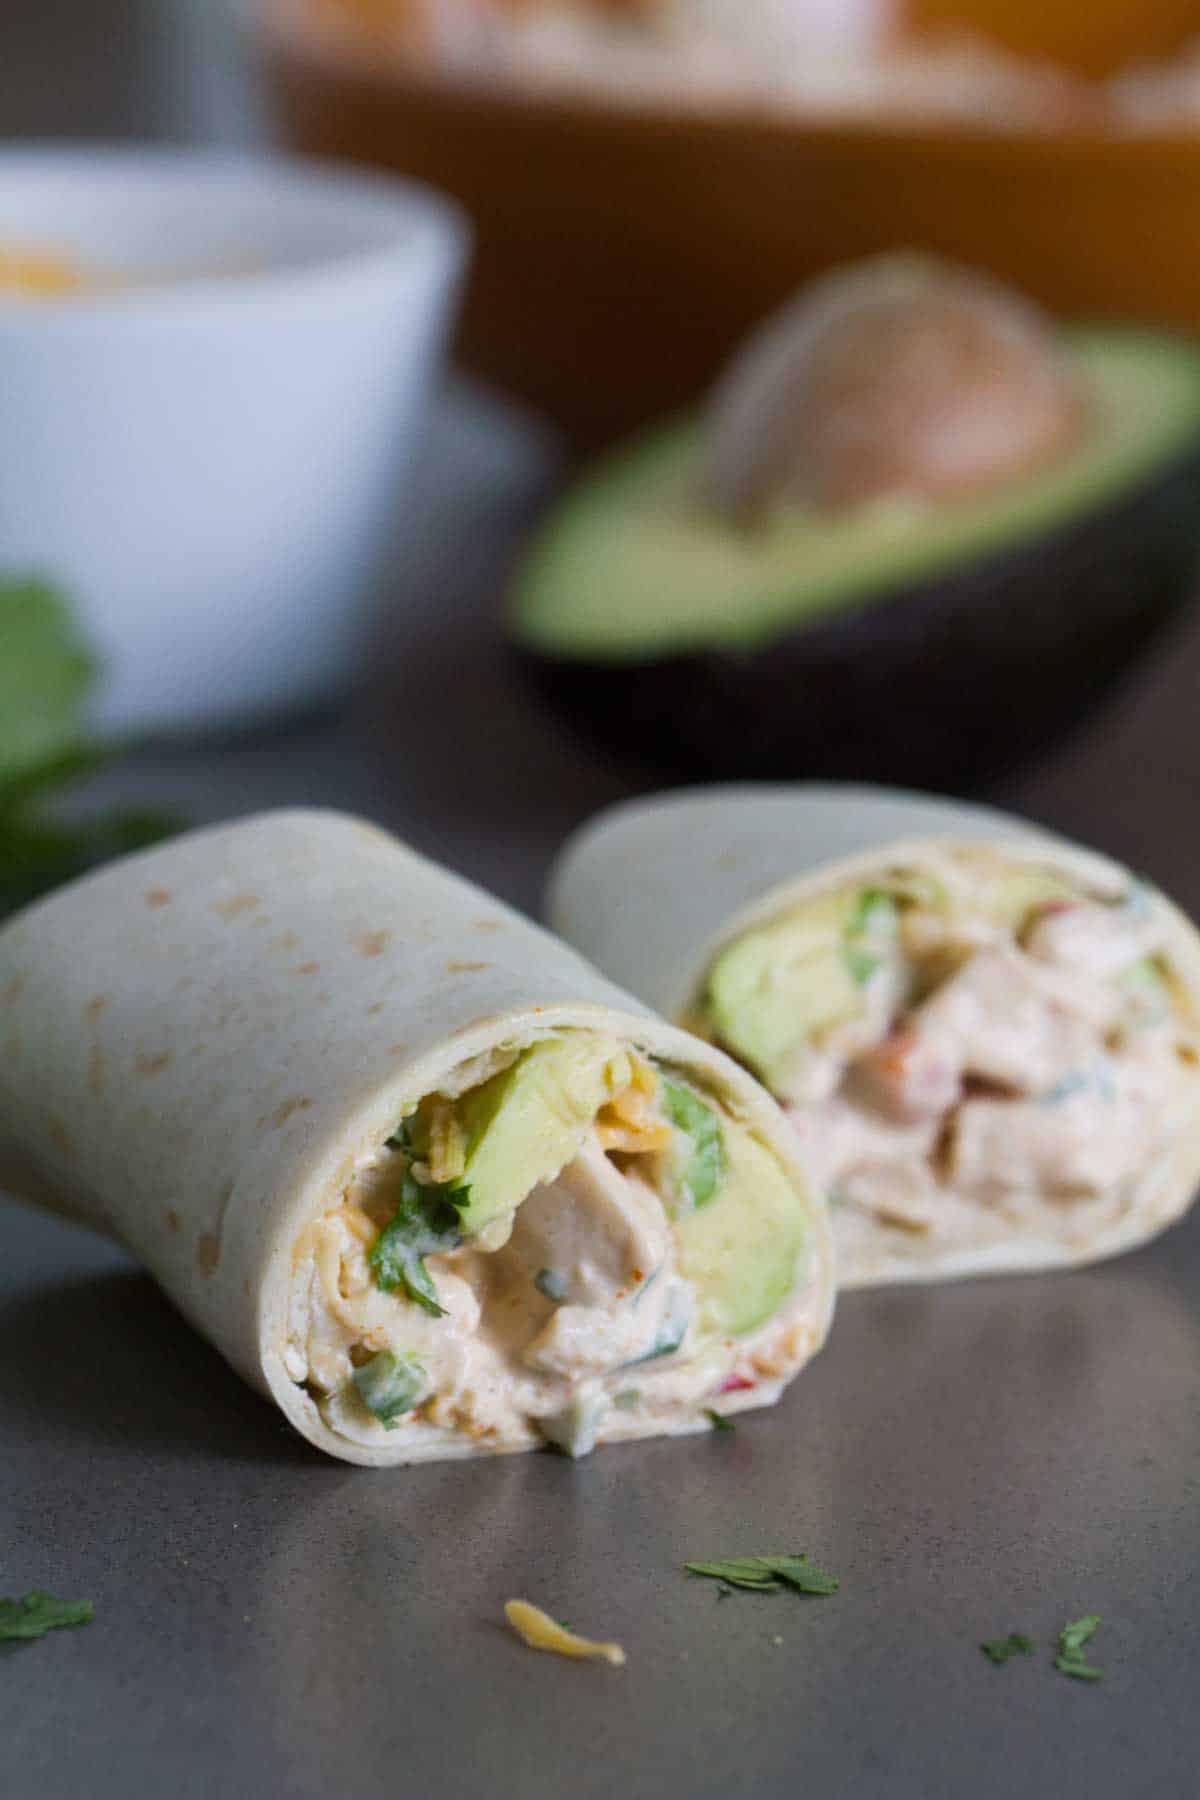 Tex-Mex Chicken Salad Wrap cut in half to show filling.